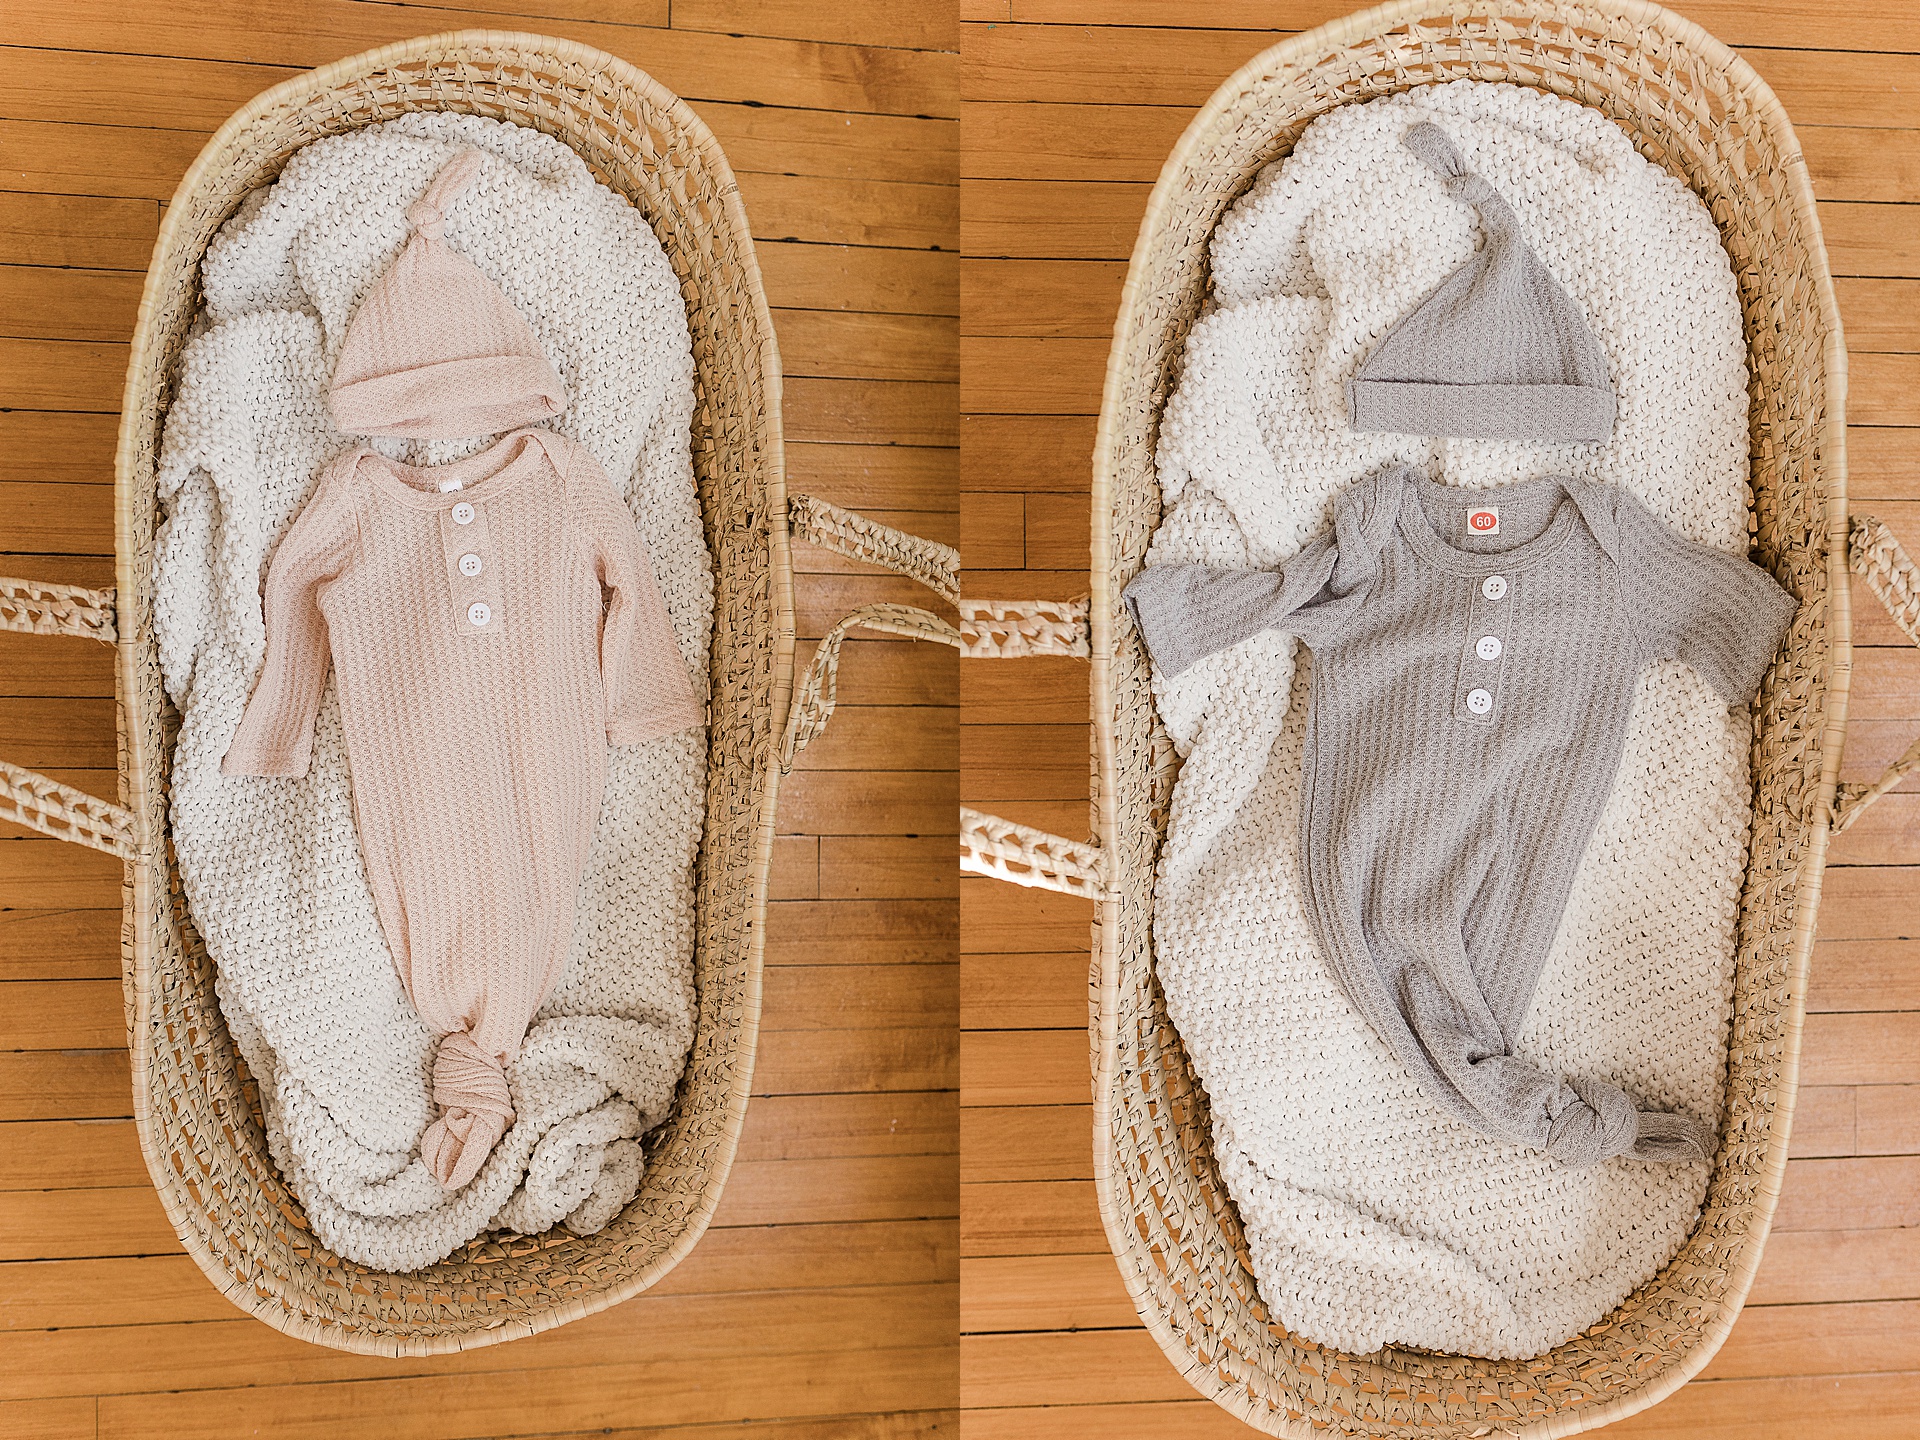 newborn outfit in basket for newborn photo session with Sara Sniderman Photography in Natick Massachusetts